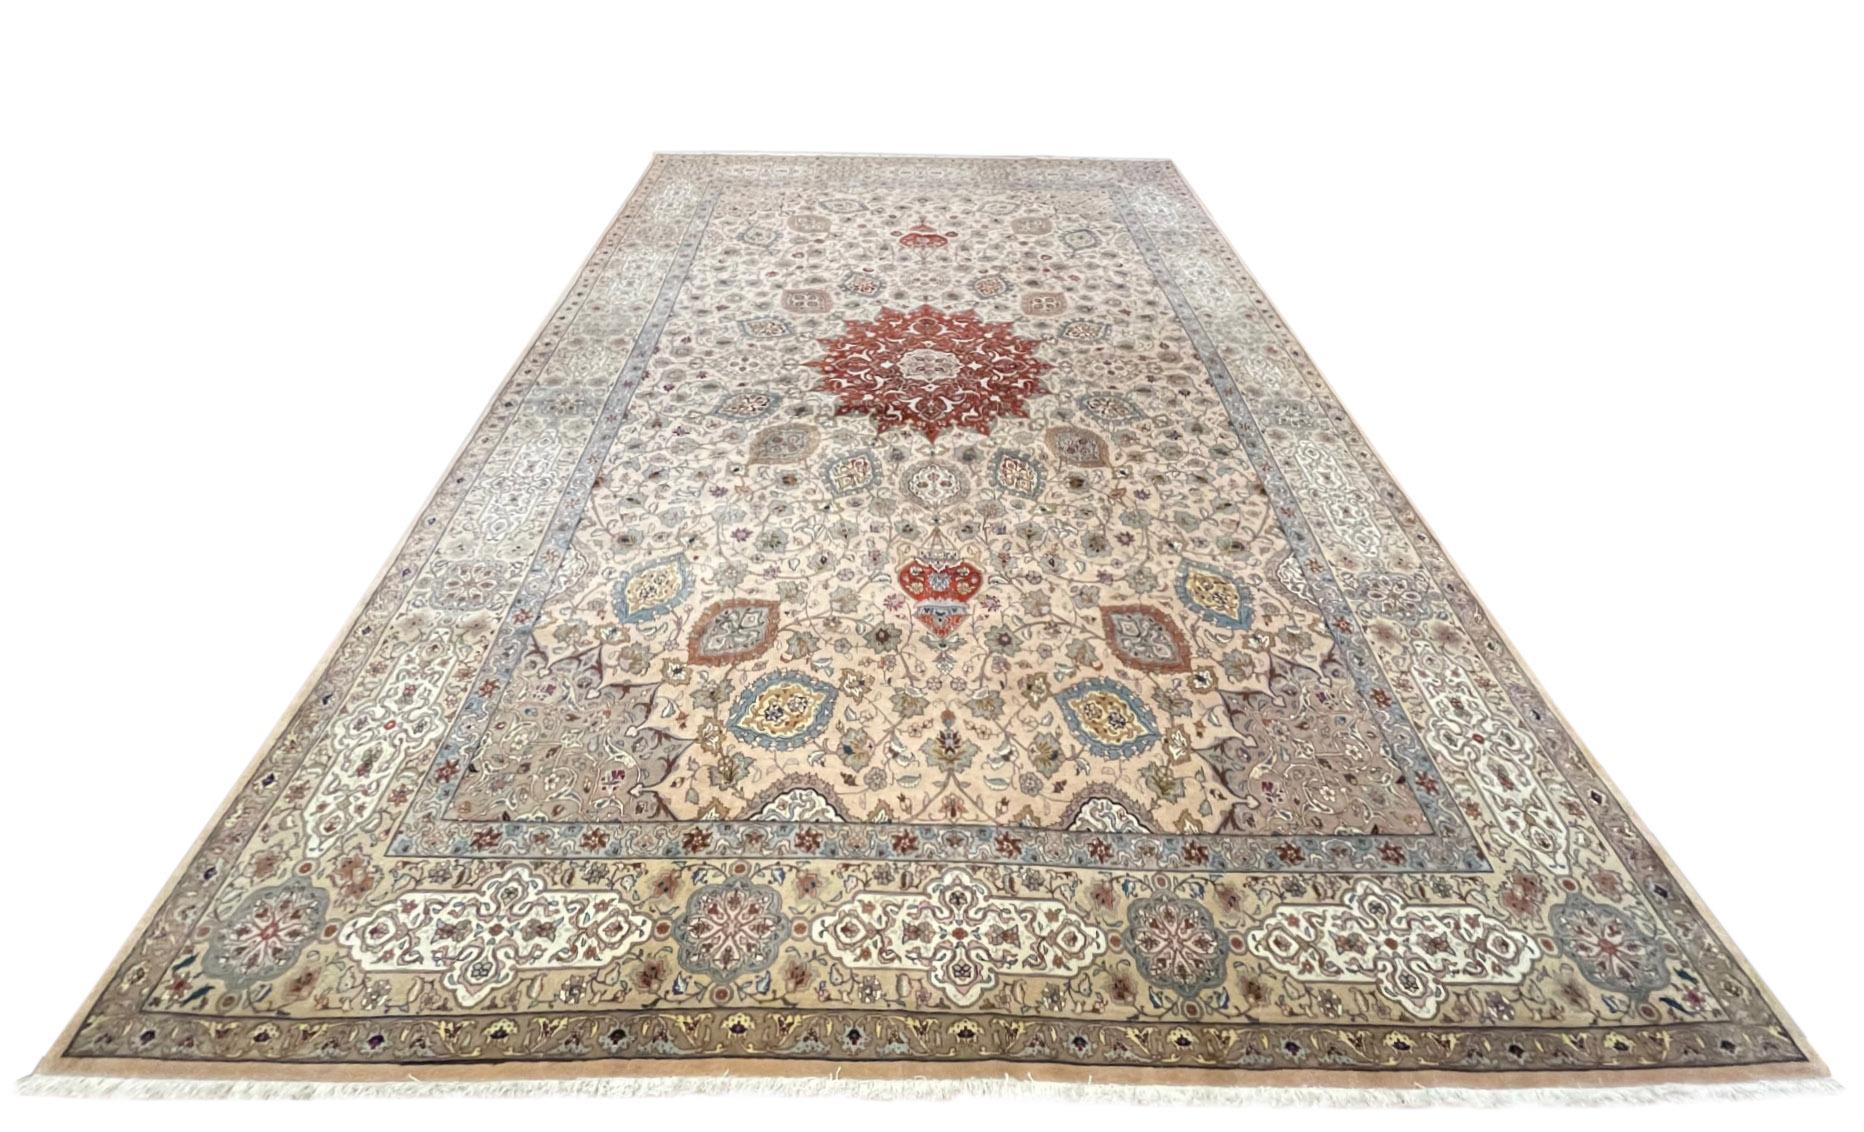 This rug is a hand-knotted Persian Tabriz rug with a great quality. Tabriz is one of the oldest rug weaving centers and makes a huge diversity of types of rugs. This rug features a floral medallion pattern and has been inspired by Sheikh Safi design